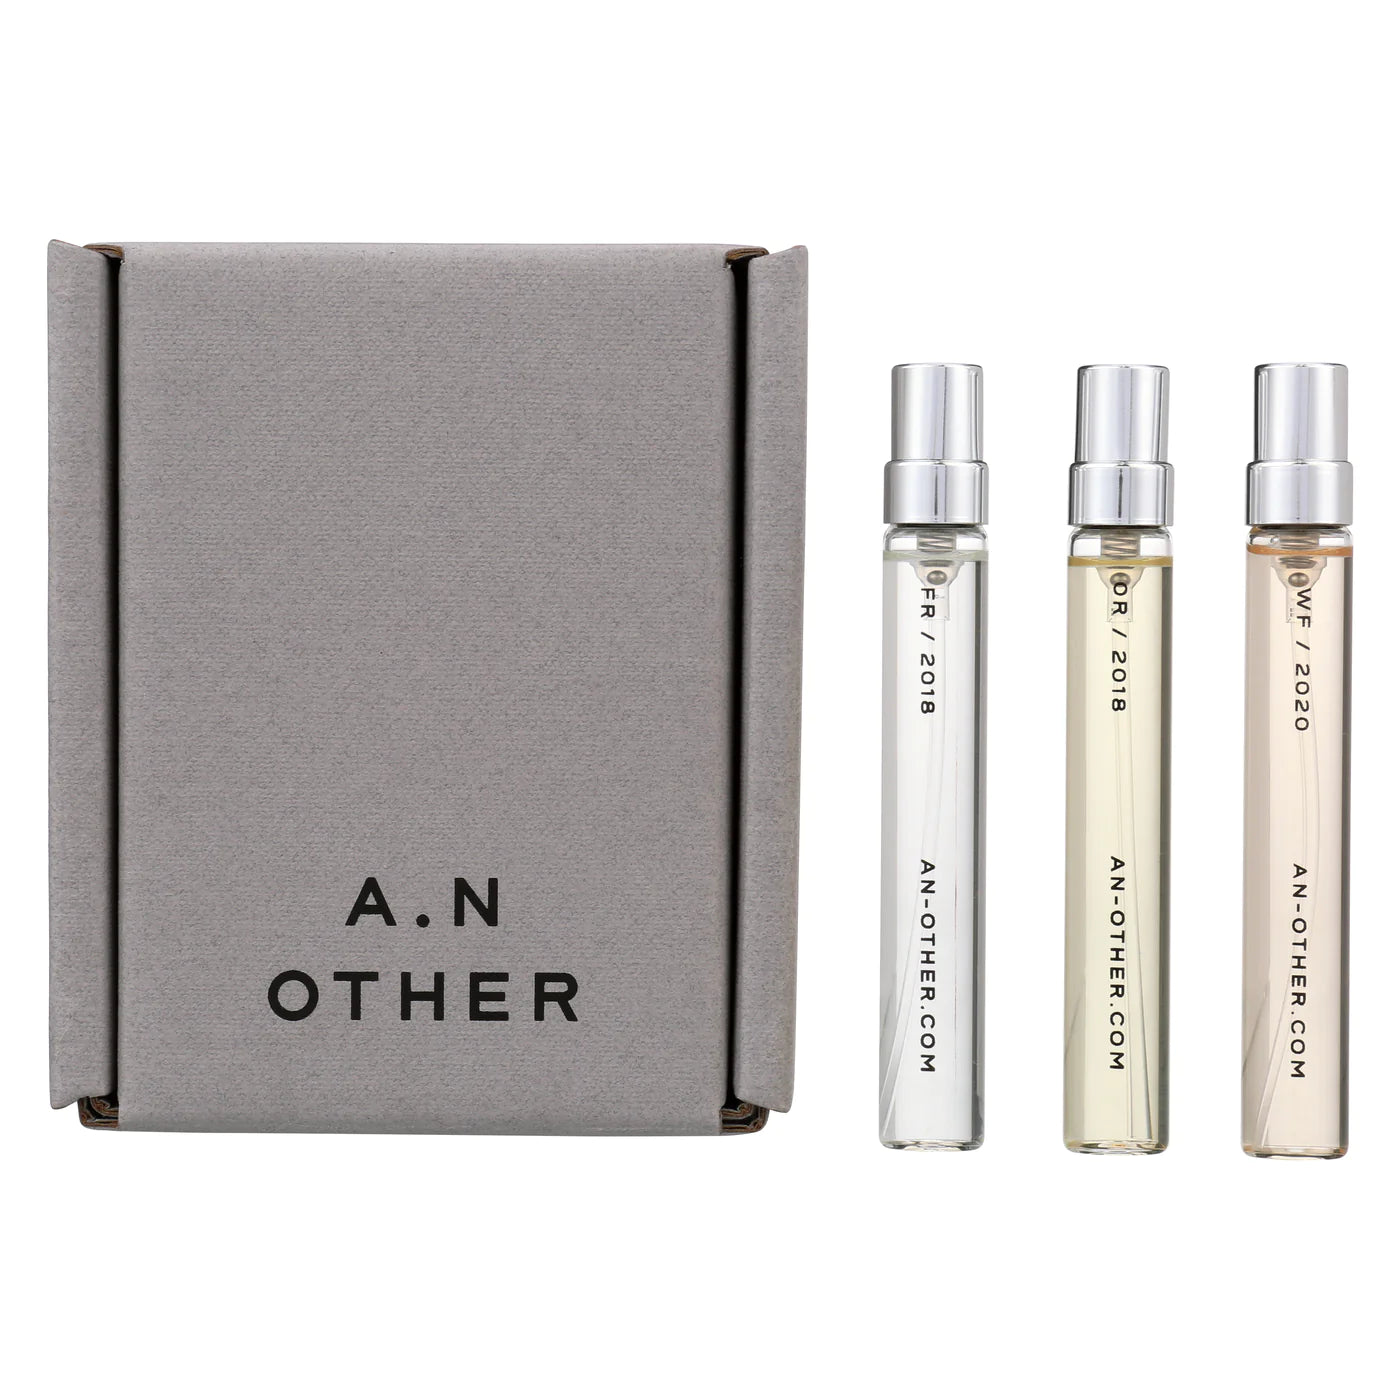 A. N. OTHER Travel Trio